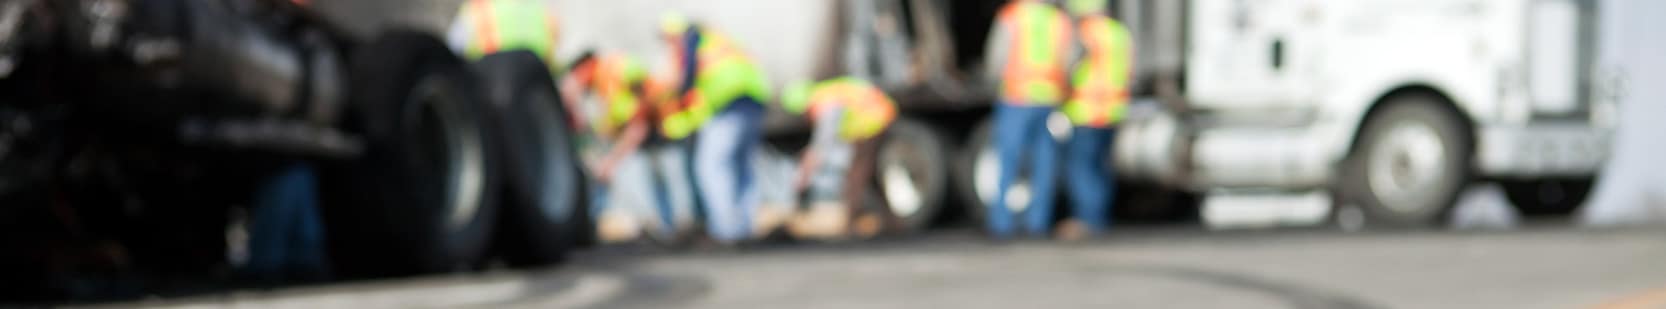 truck accidents lawyer indianapolis